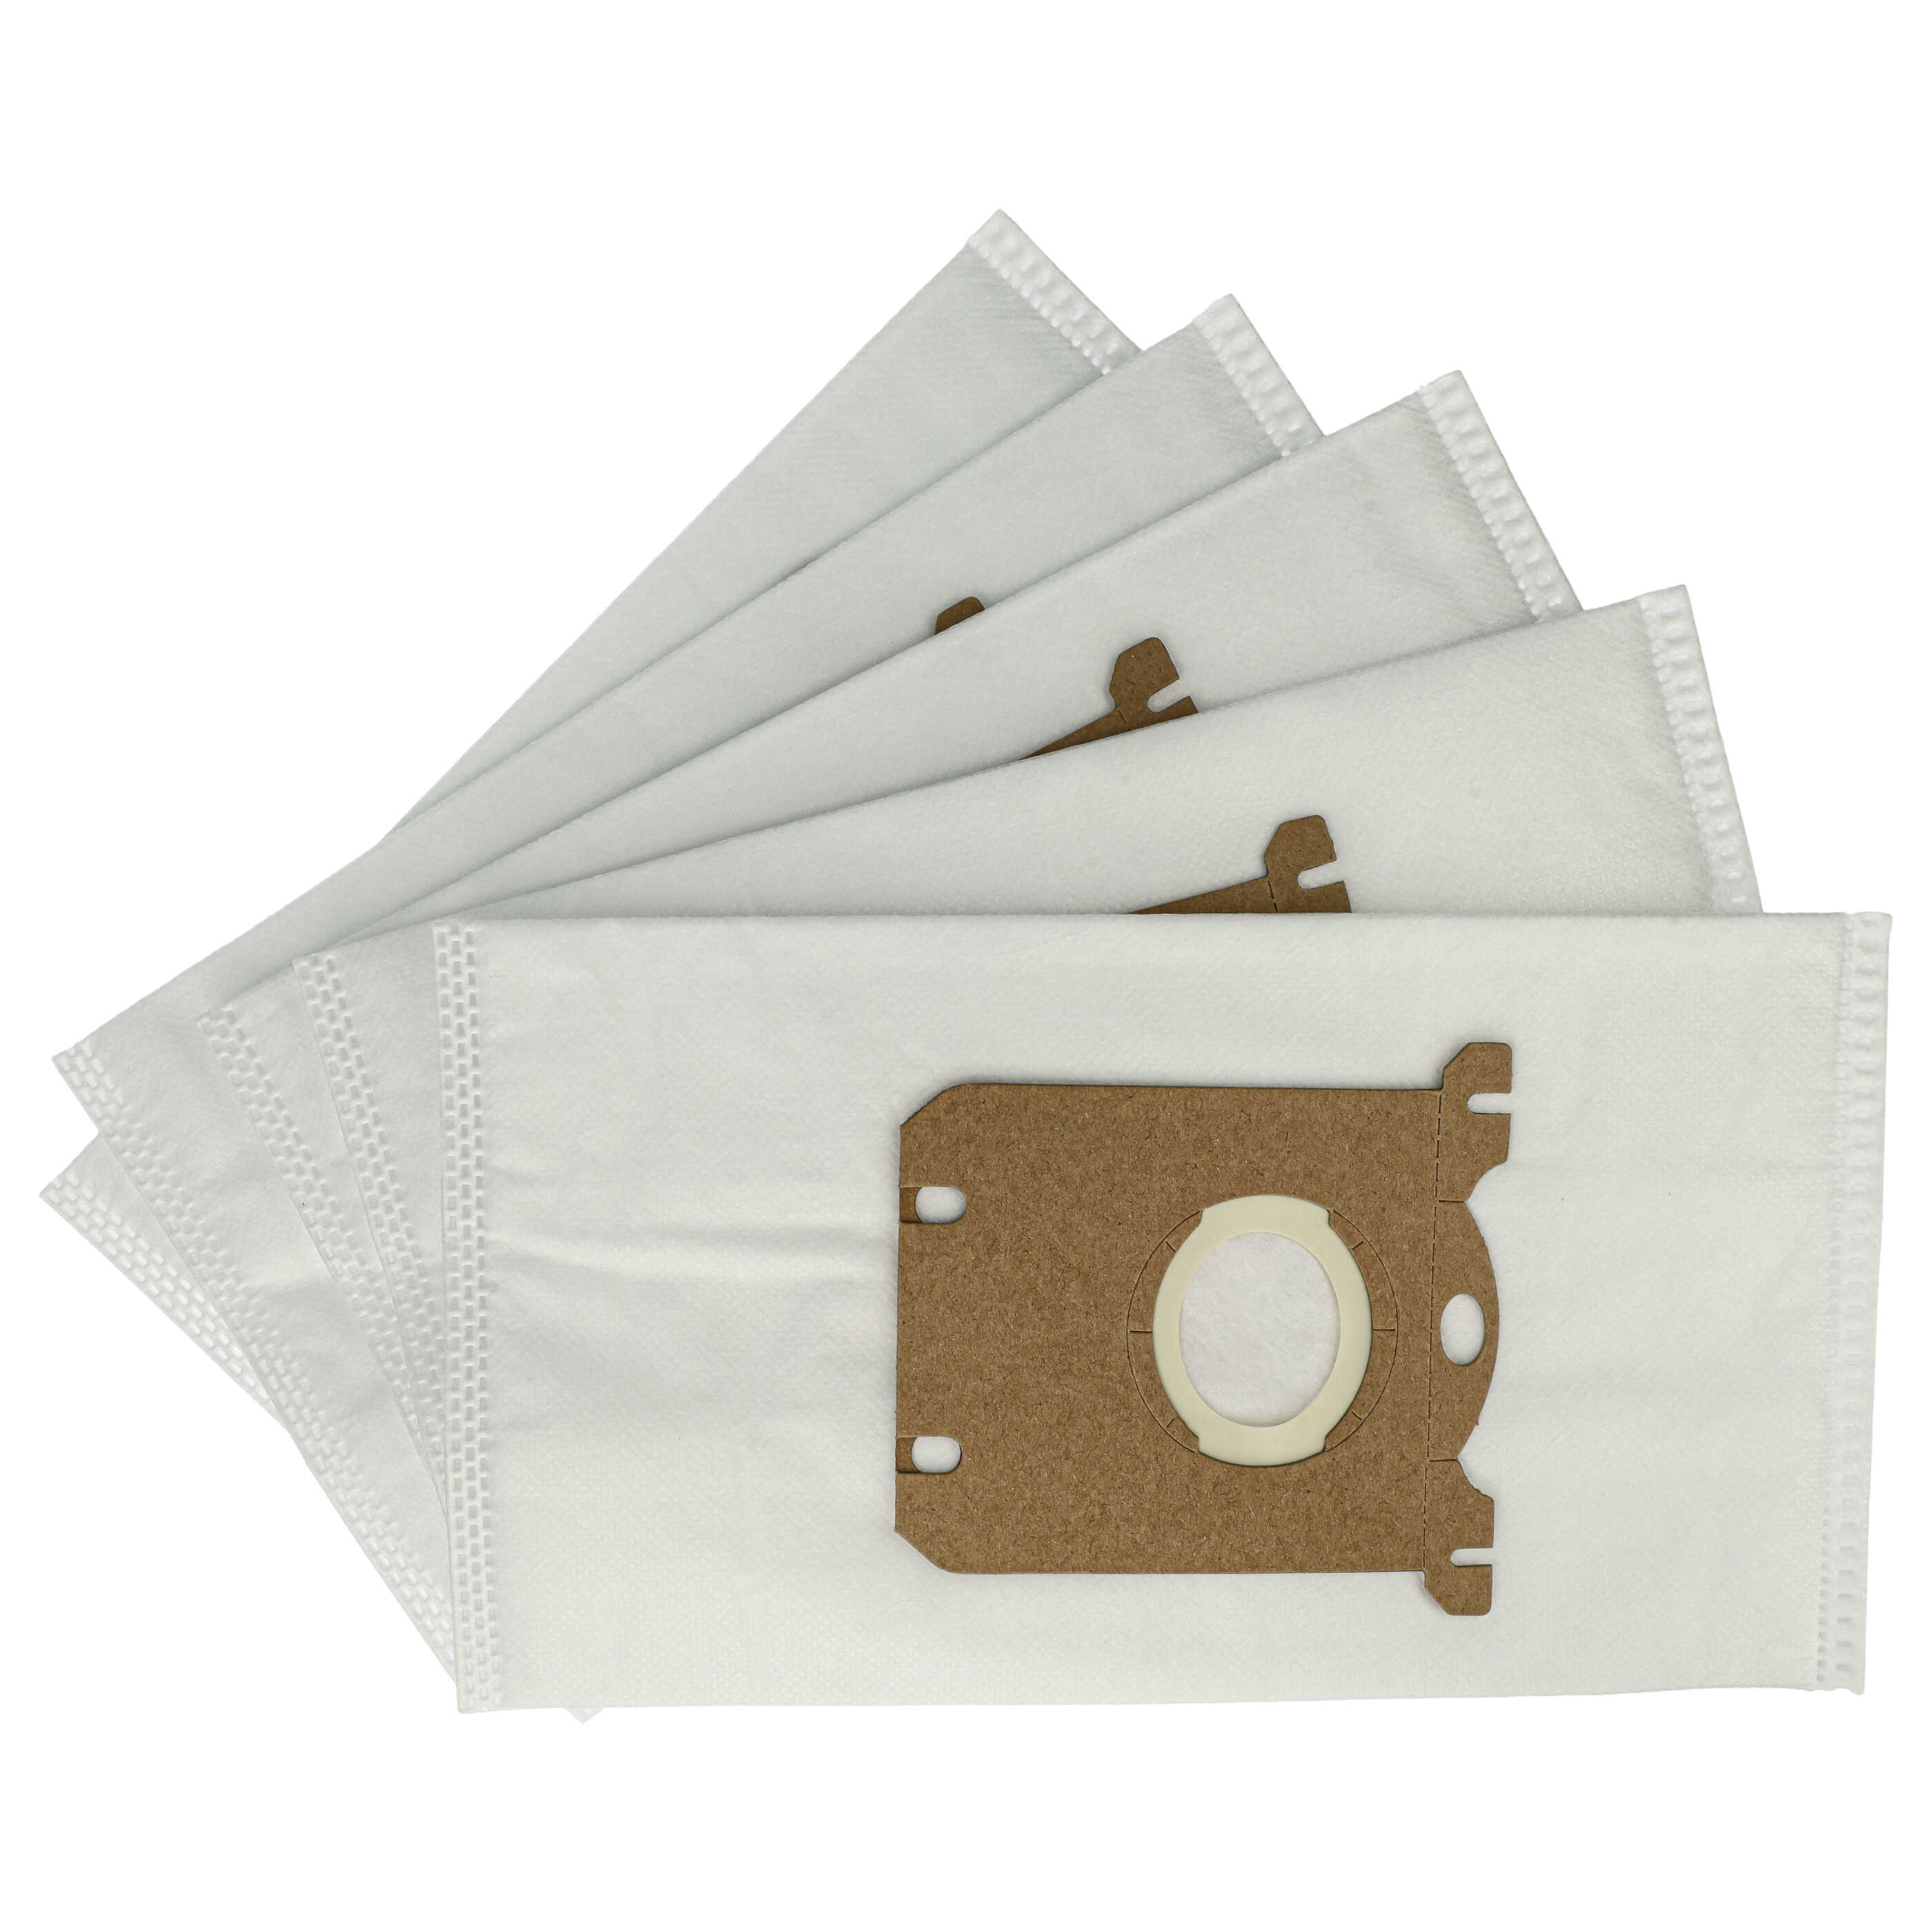 5x Vacuum Cleaner Bag replaces AEG 9001684753, GR203S, 900166039/9 for Philips - microfleece / cardboard